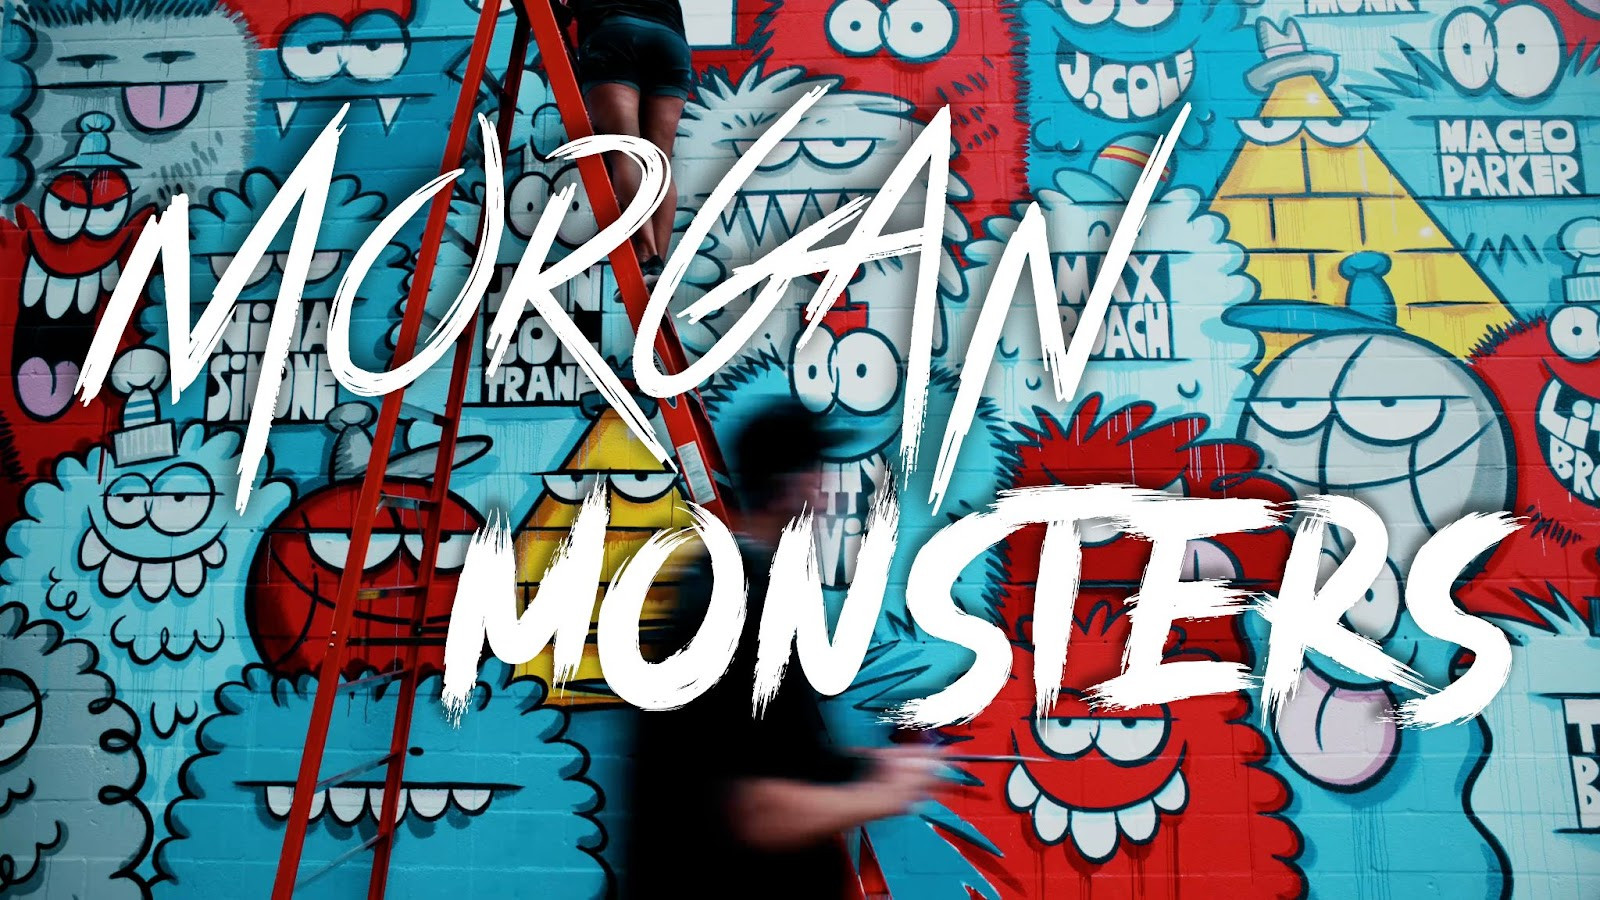 Key Art for Morgan Monsters Video Project